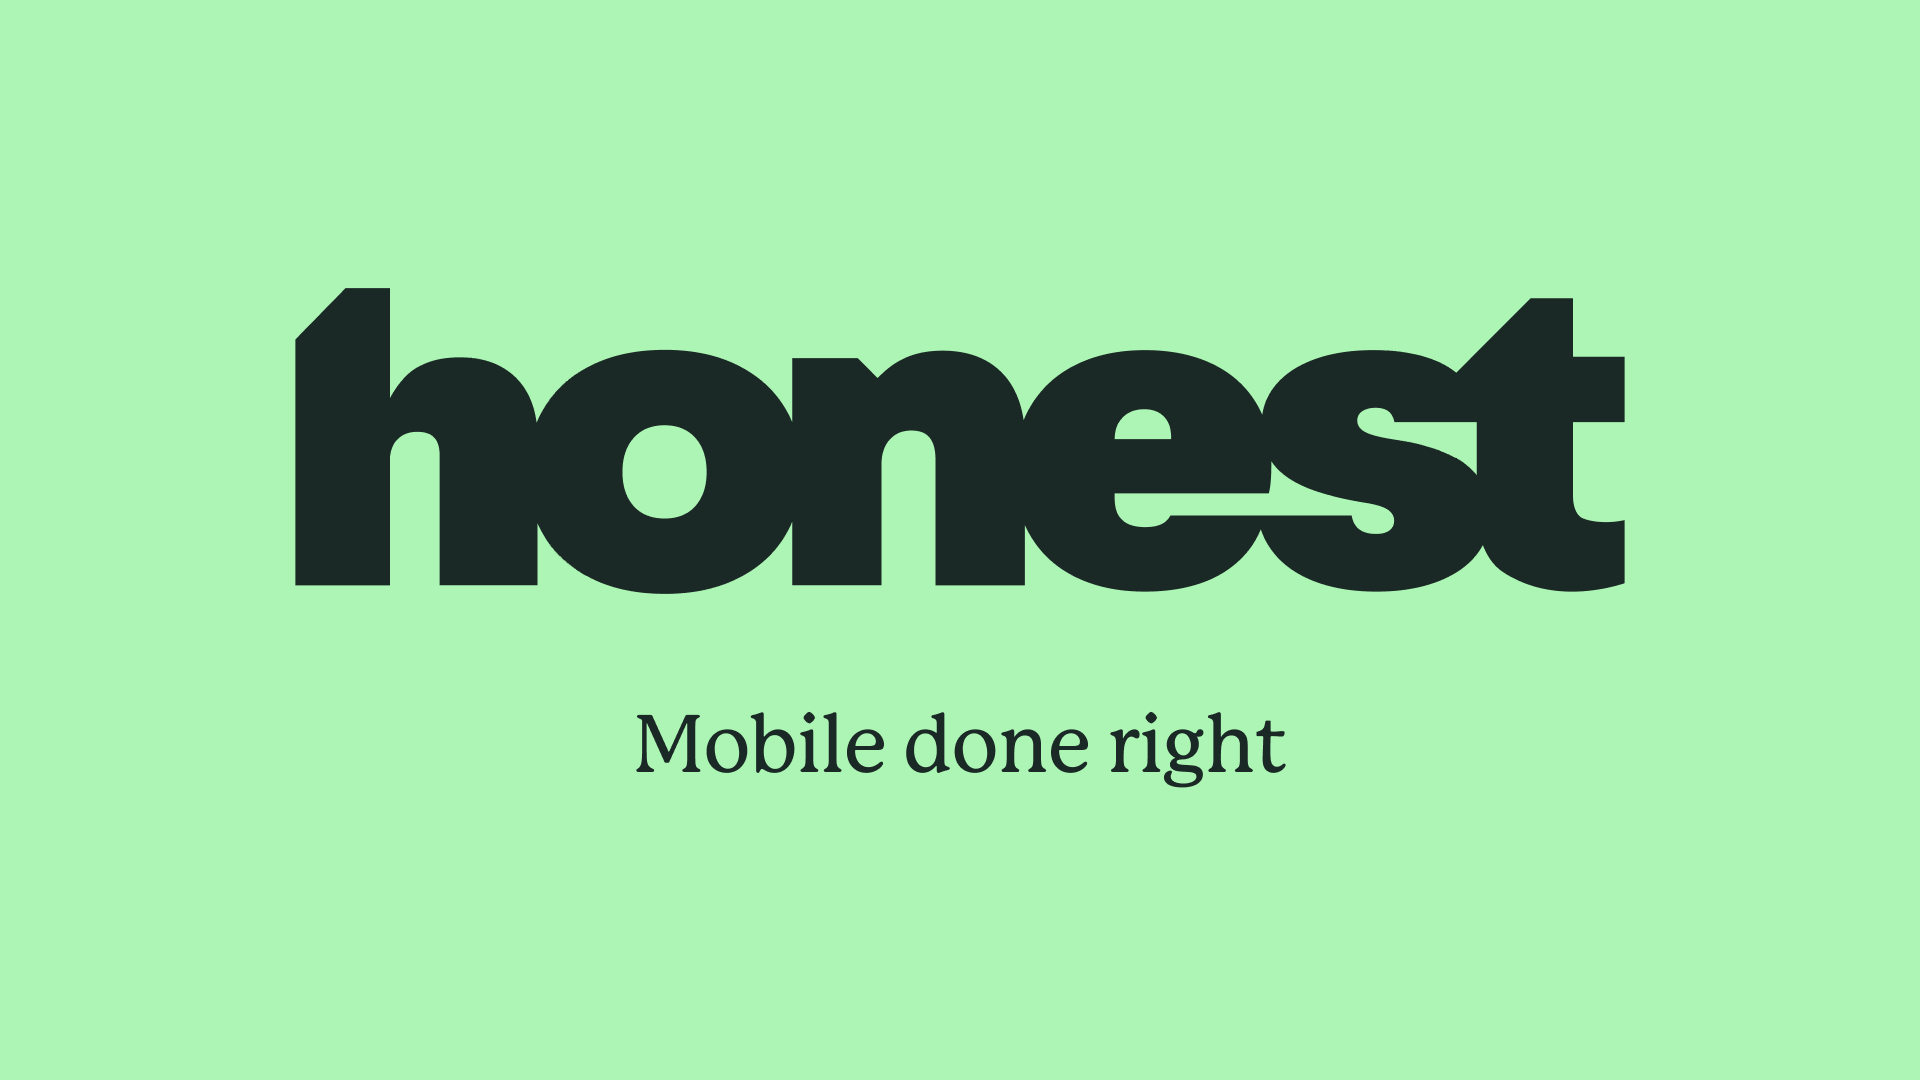 Our new wordmark and strapline: Mobile done right